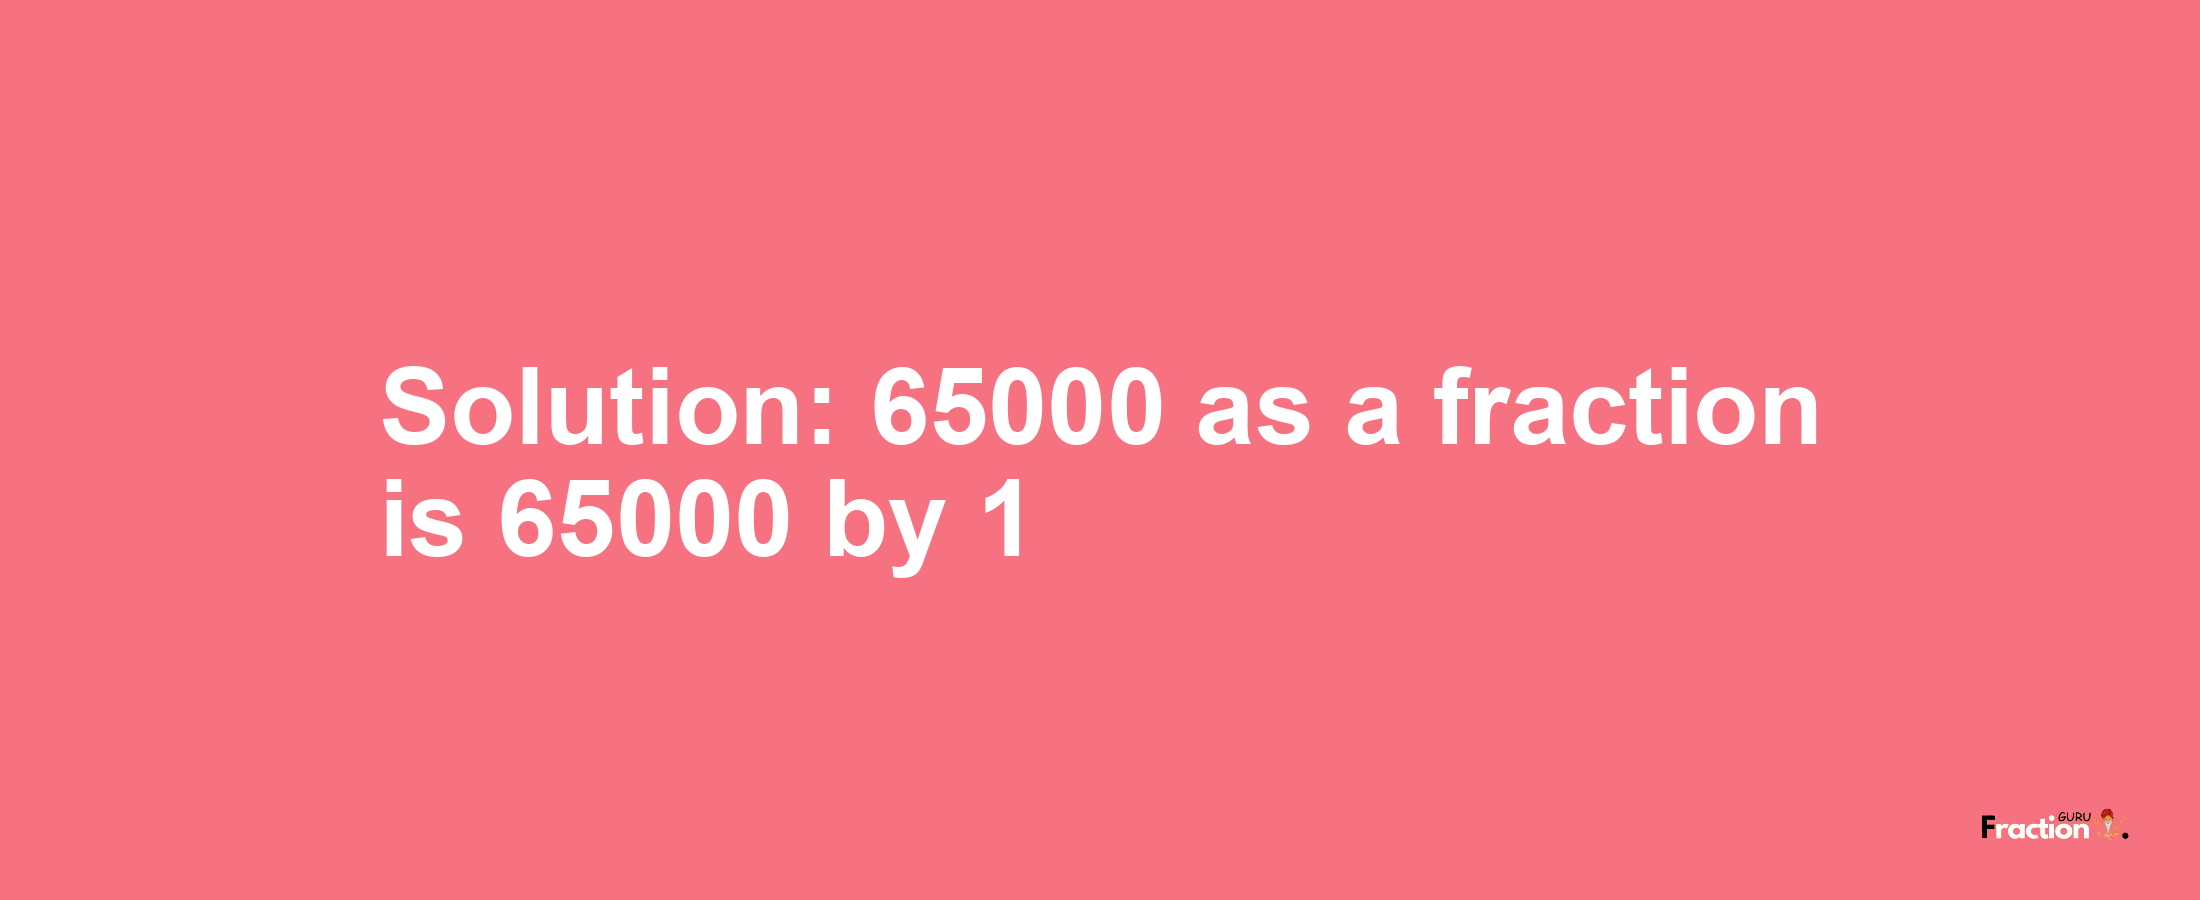 Solution:65000 as a fraction is 65000/1